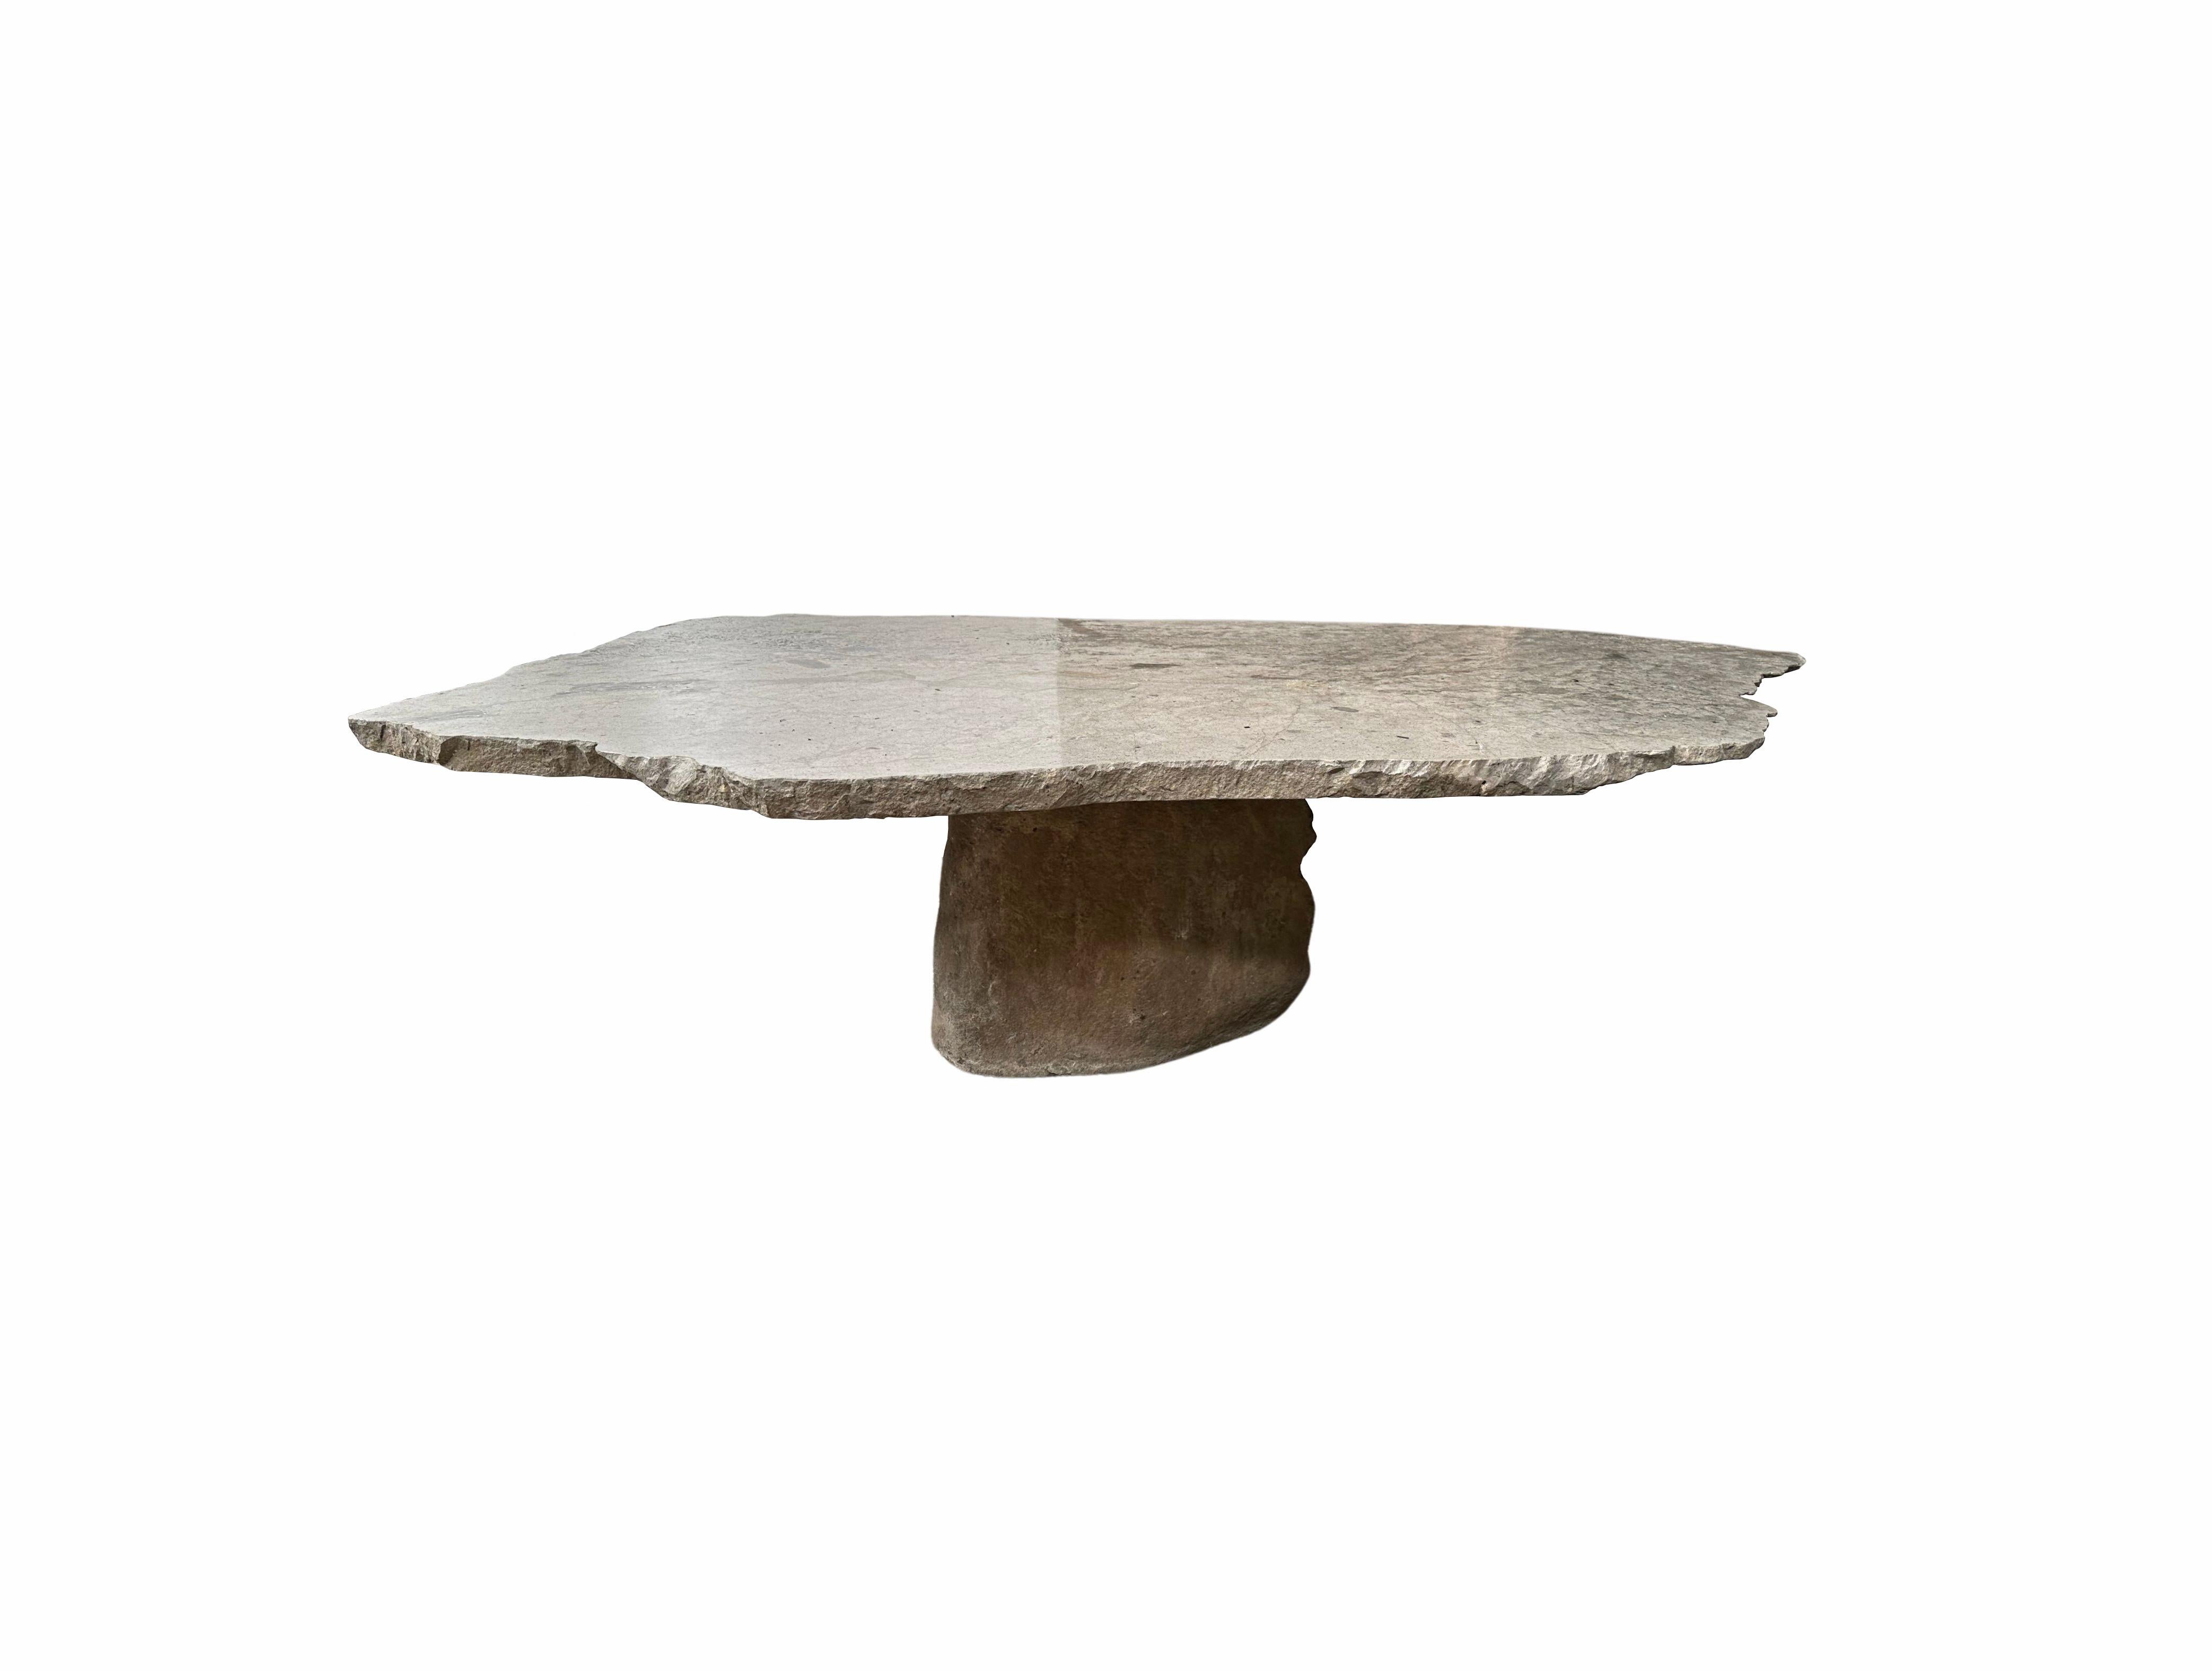 A incredibly heavy and solid stone table with a wonderful organic form. This sculptural object was crafted from solid stone sourced from a river bed in East Java. A raw and organic object with beautiful textures. Its top side was carved, sanded down